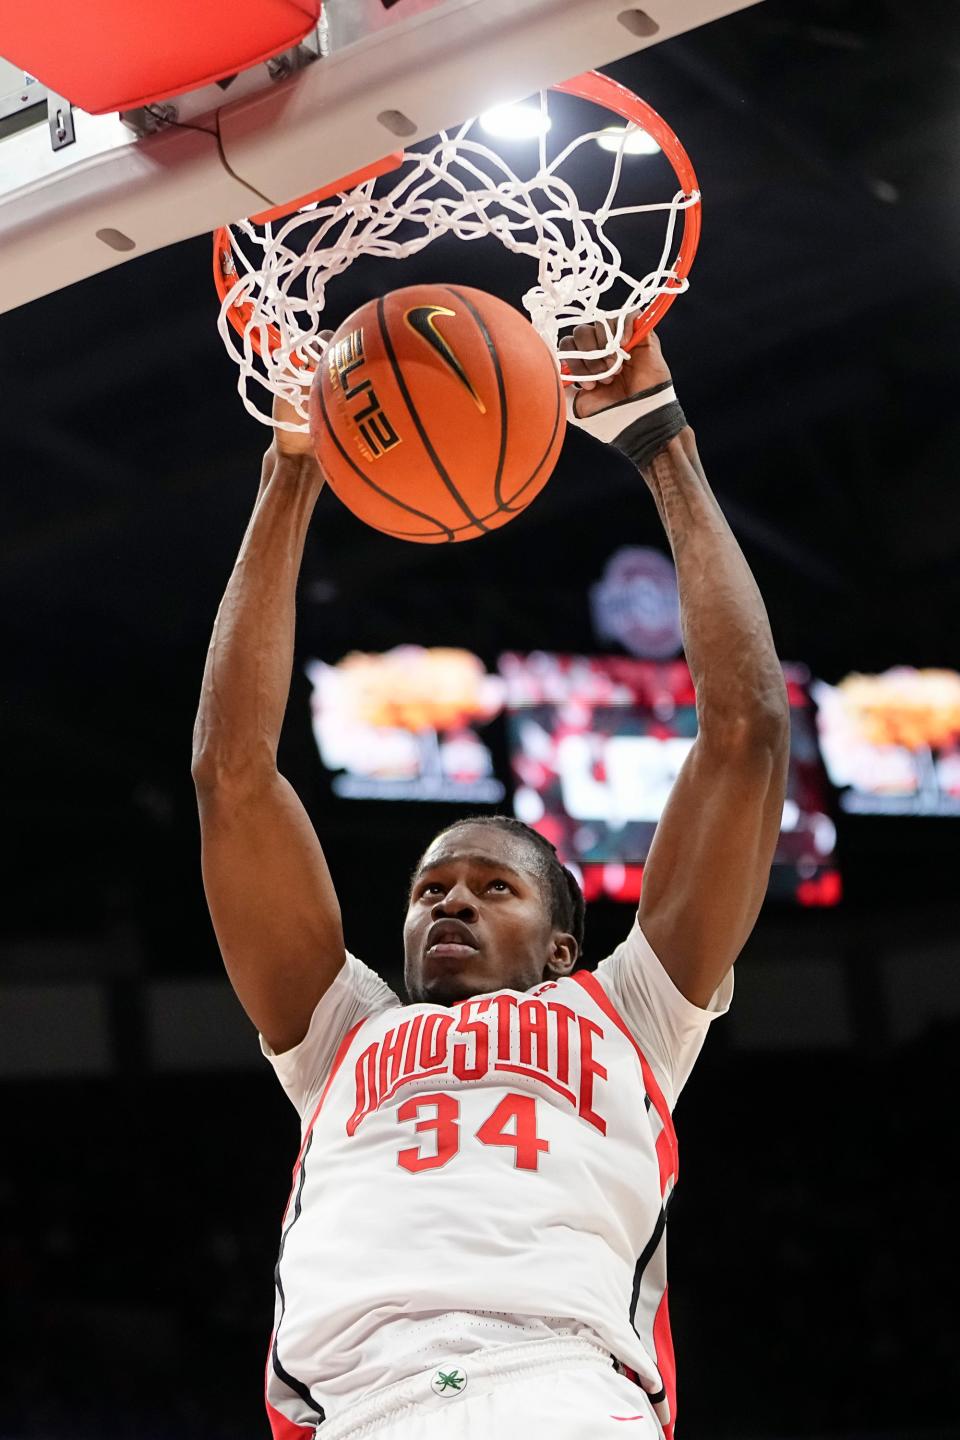 Ohio State center Felix Okpara dunks during the Buckeyes' 79-67 win over Penn State Saturday.